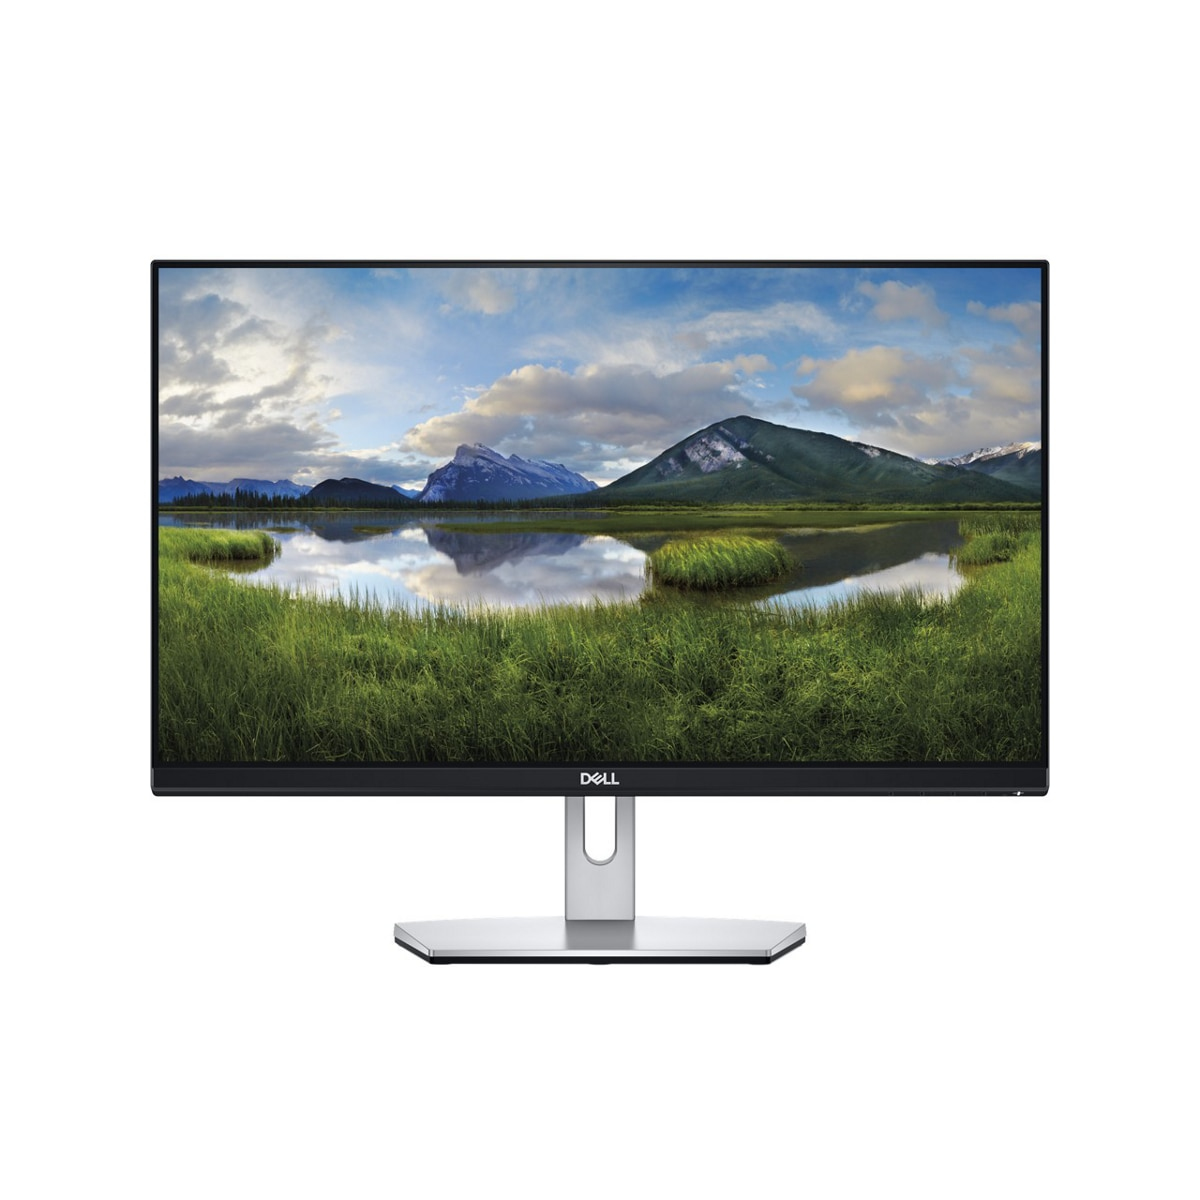 DELL S Series S2319NX LED display